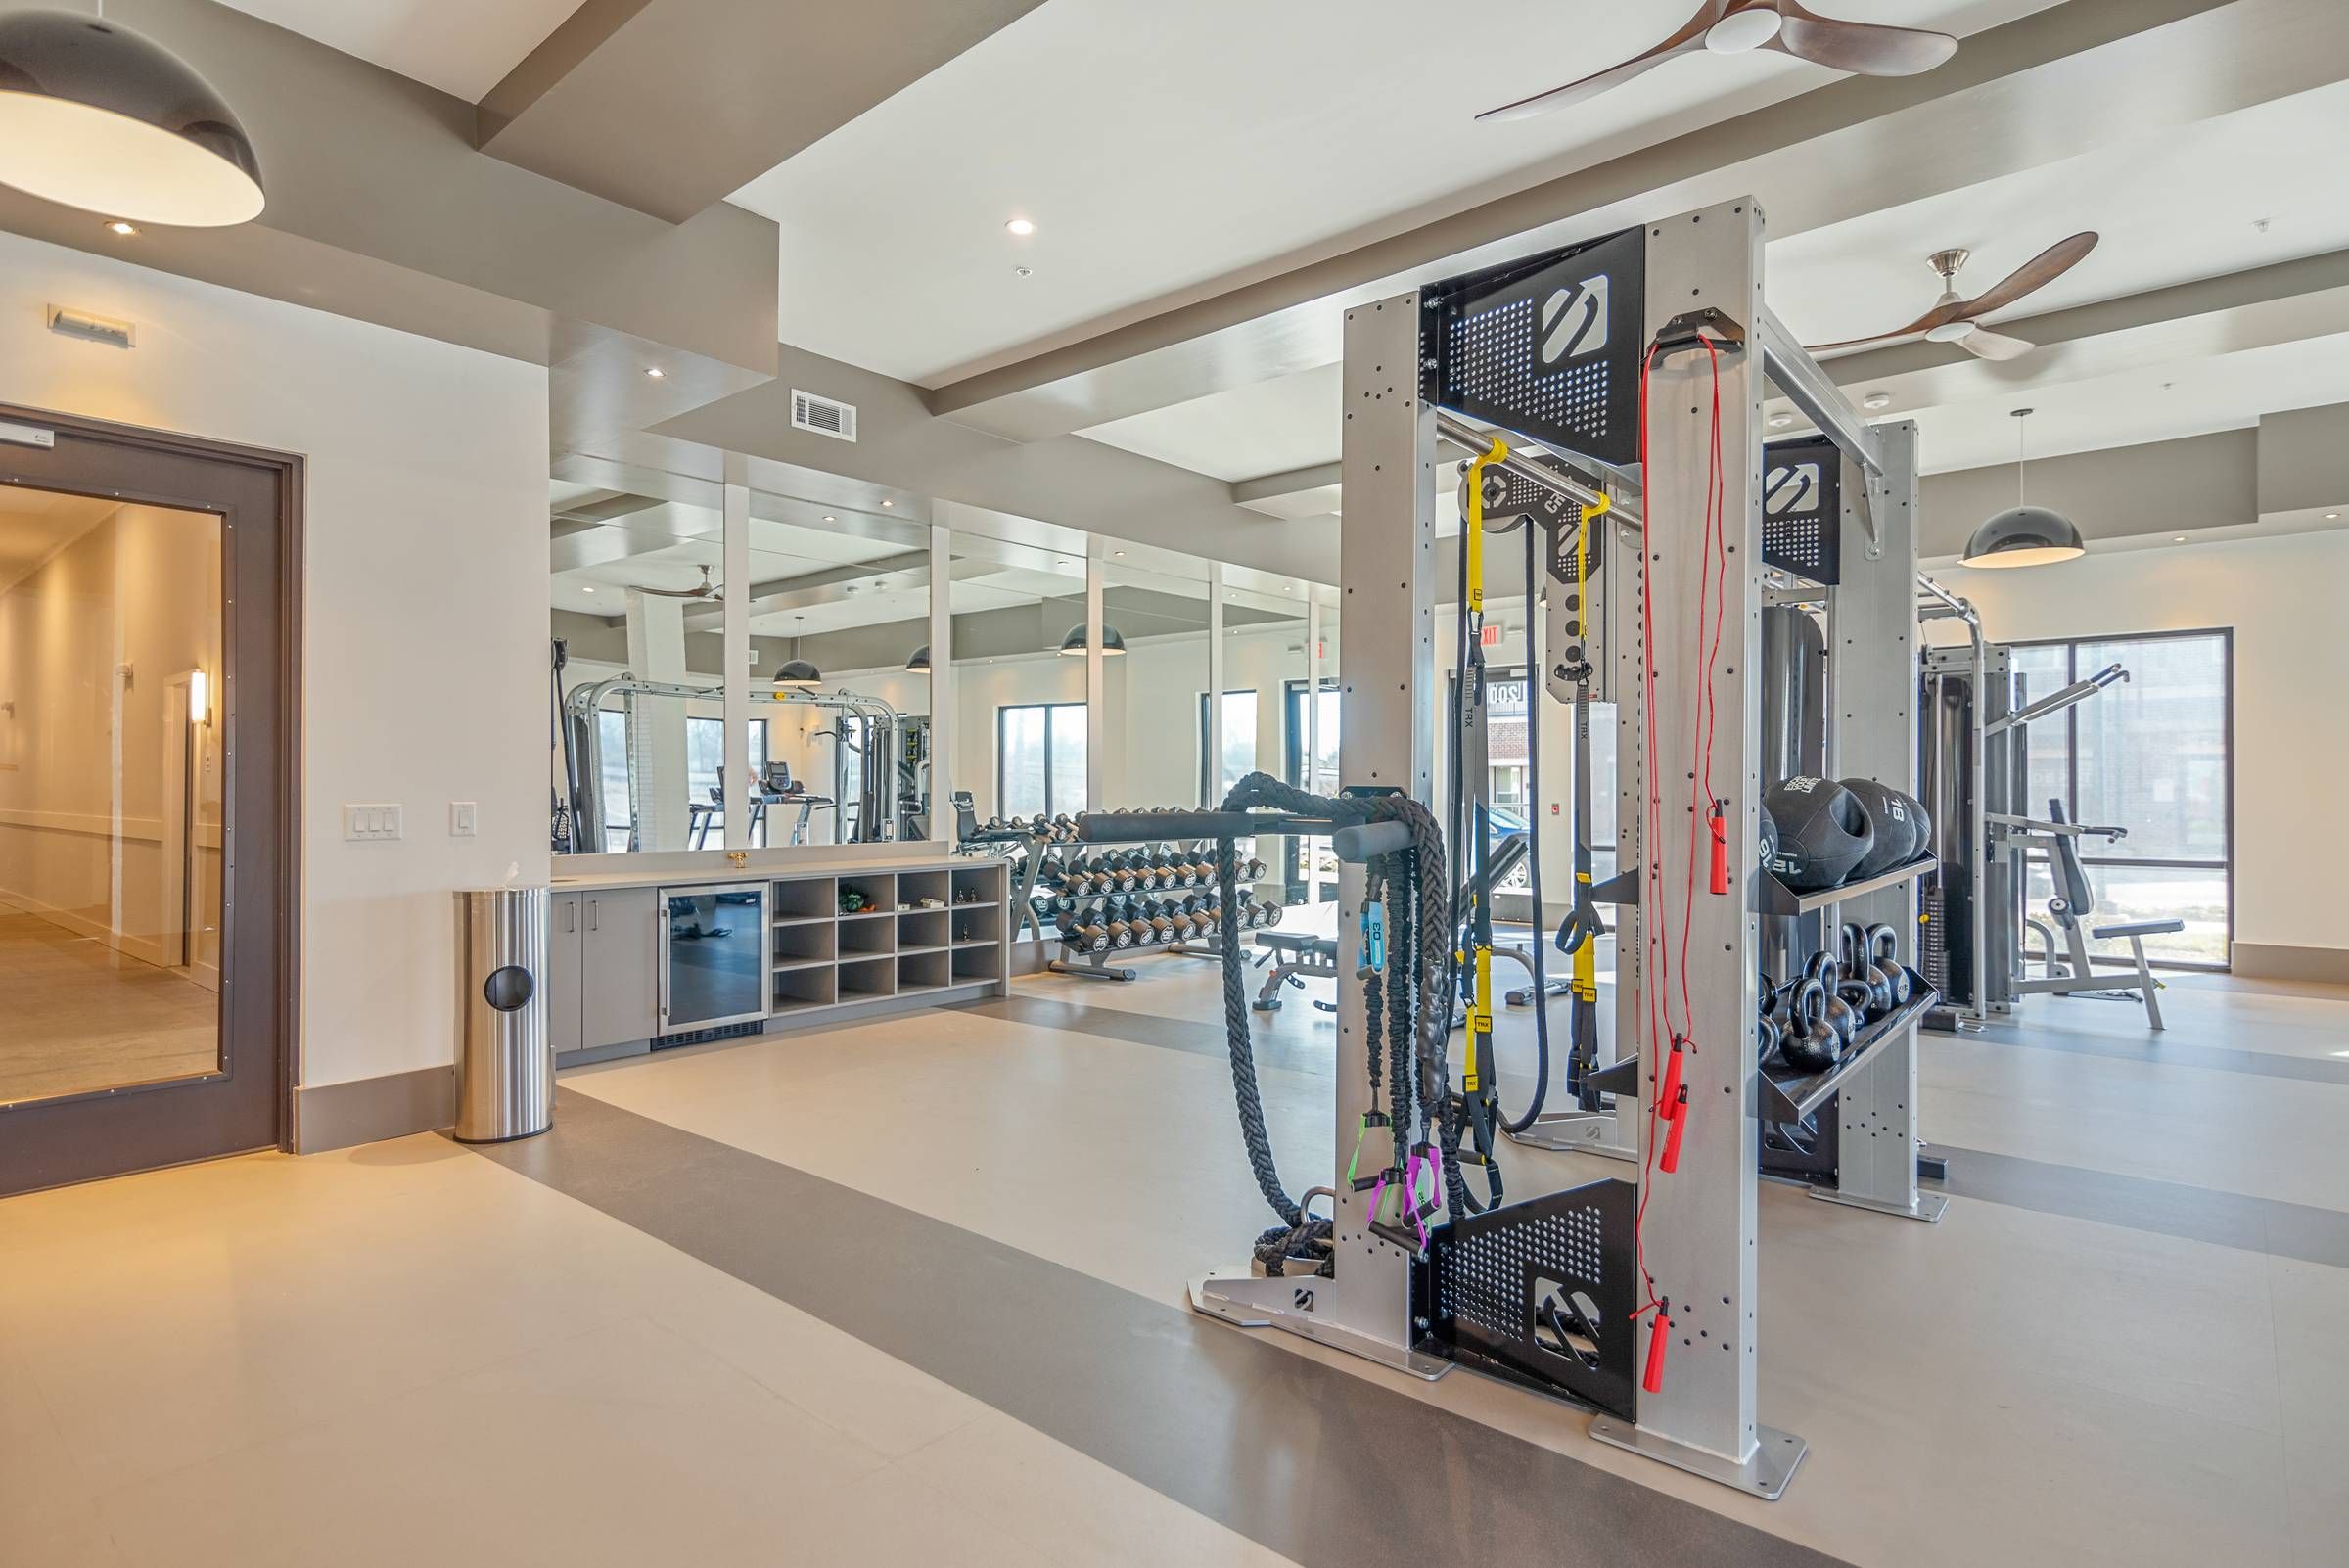 Alta Depot gym room with various exercise equipment and mirrors for fitness enthusiasts to work out and monitor their form.